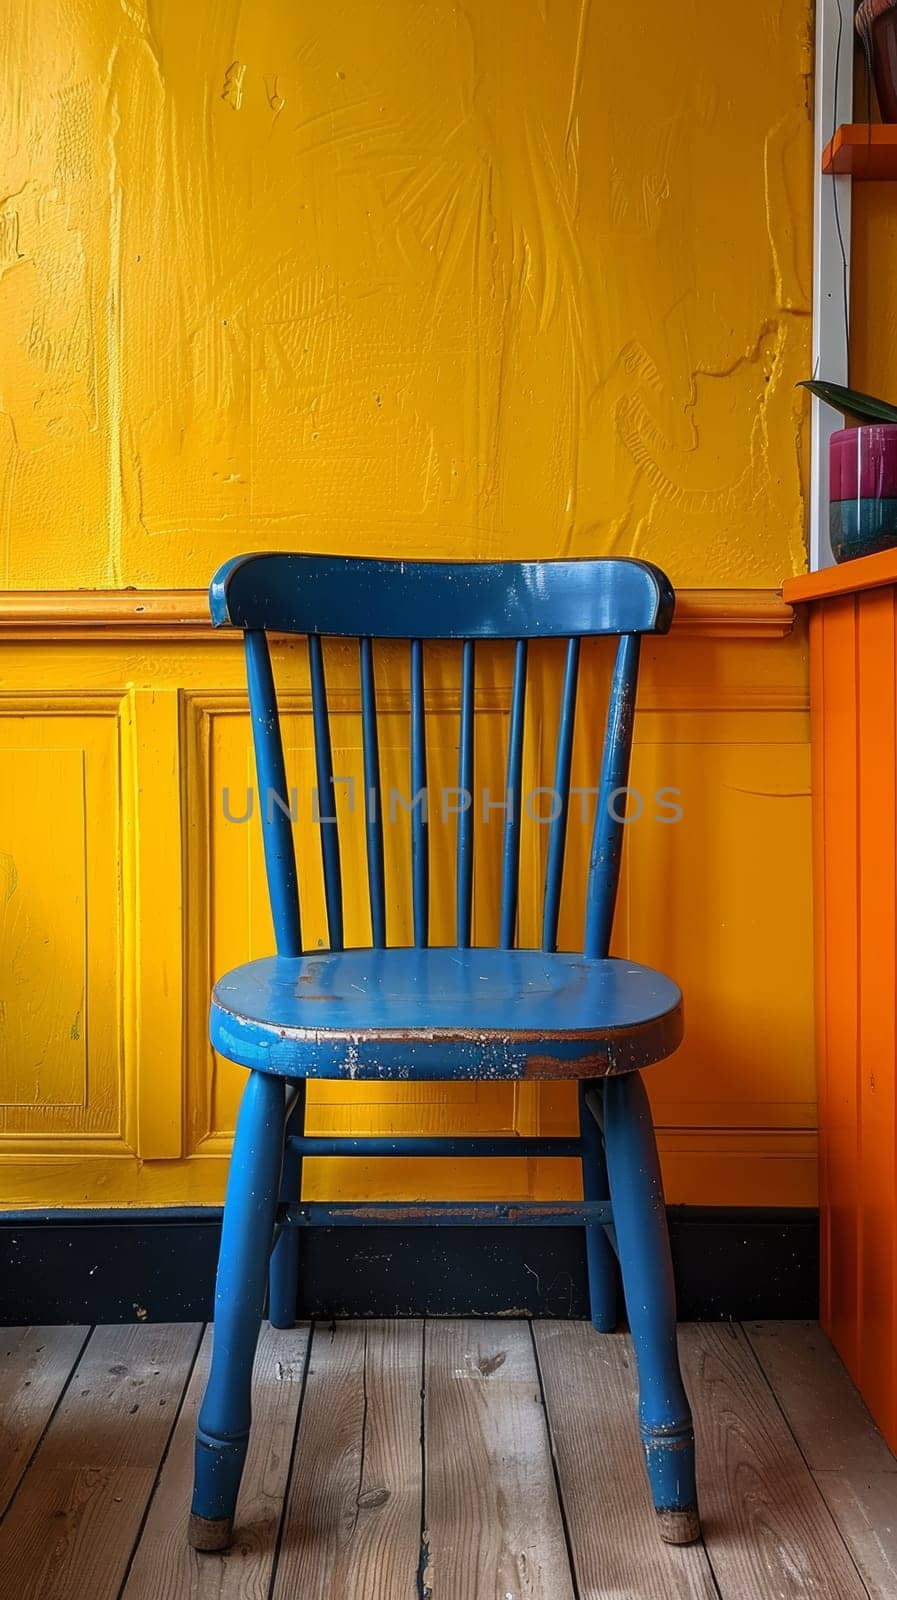 A blue chair sitting in front of a yellow wall